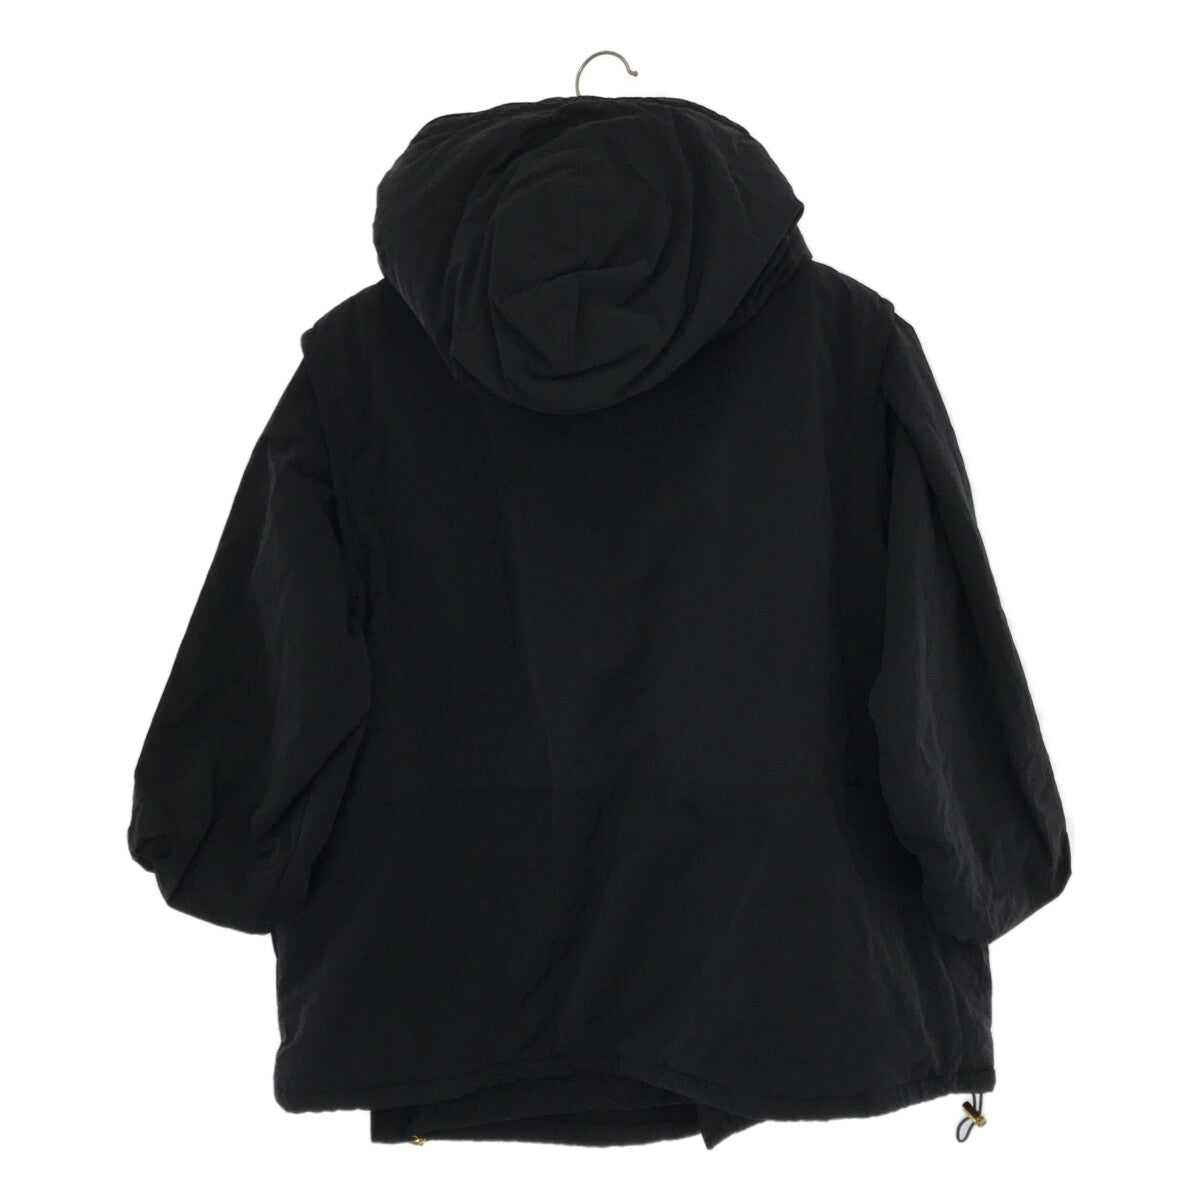 REMI RELIEF / レミレリーフ | 2022SS | × L'Appartement アパルトモン別注 Zip up 2wayブルゾン |  F |